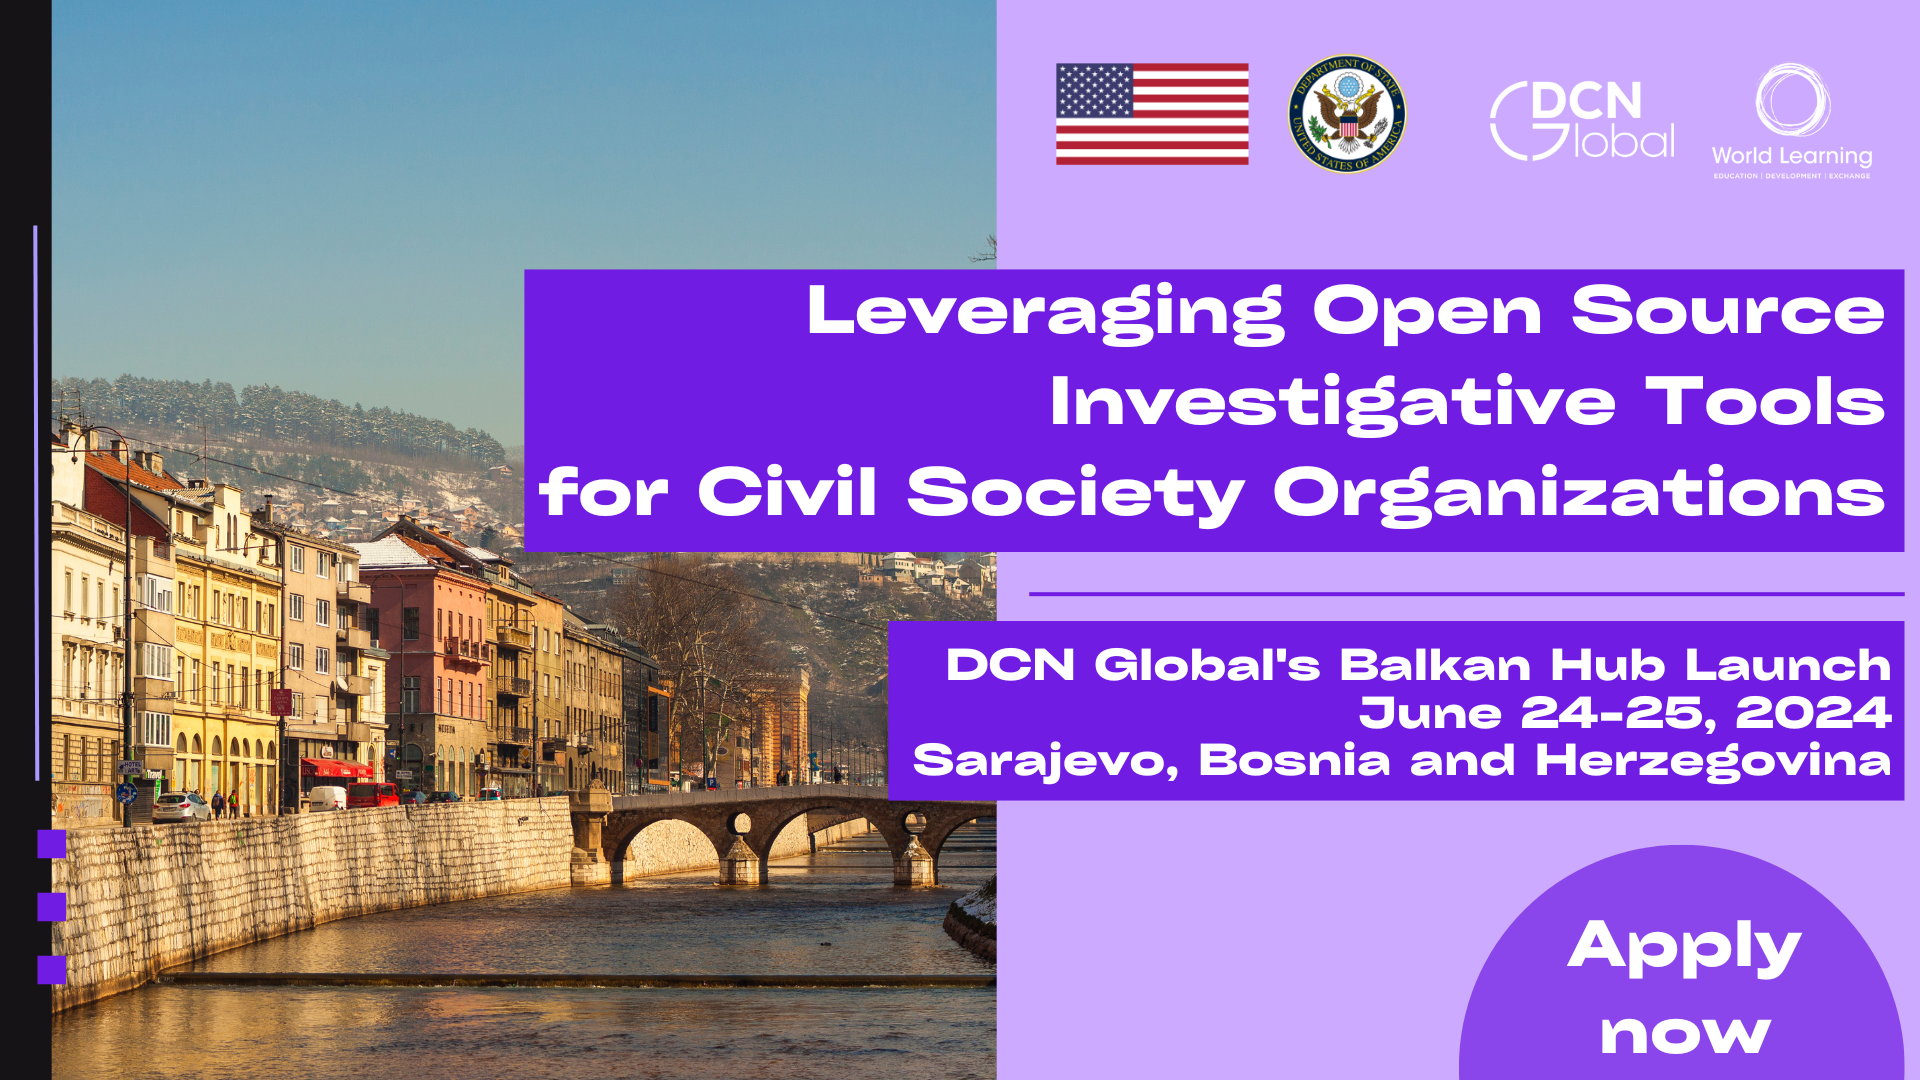 Leveraging Open Source Investigative Tools for Civil Society Organizations